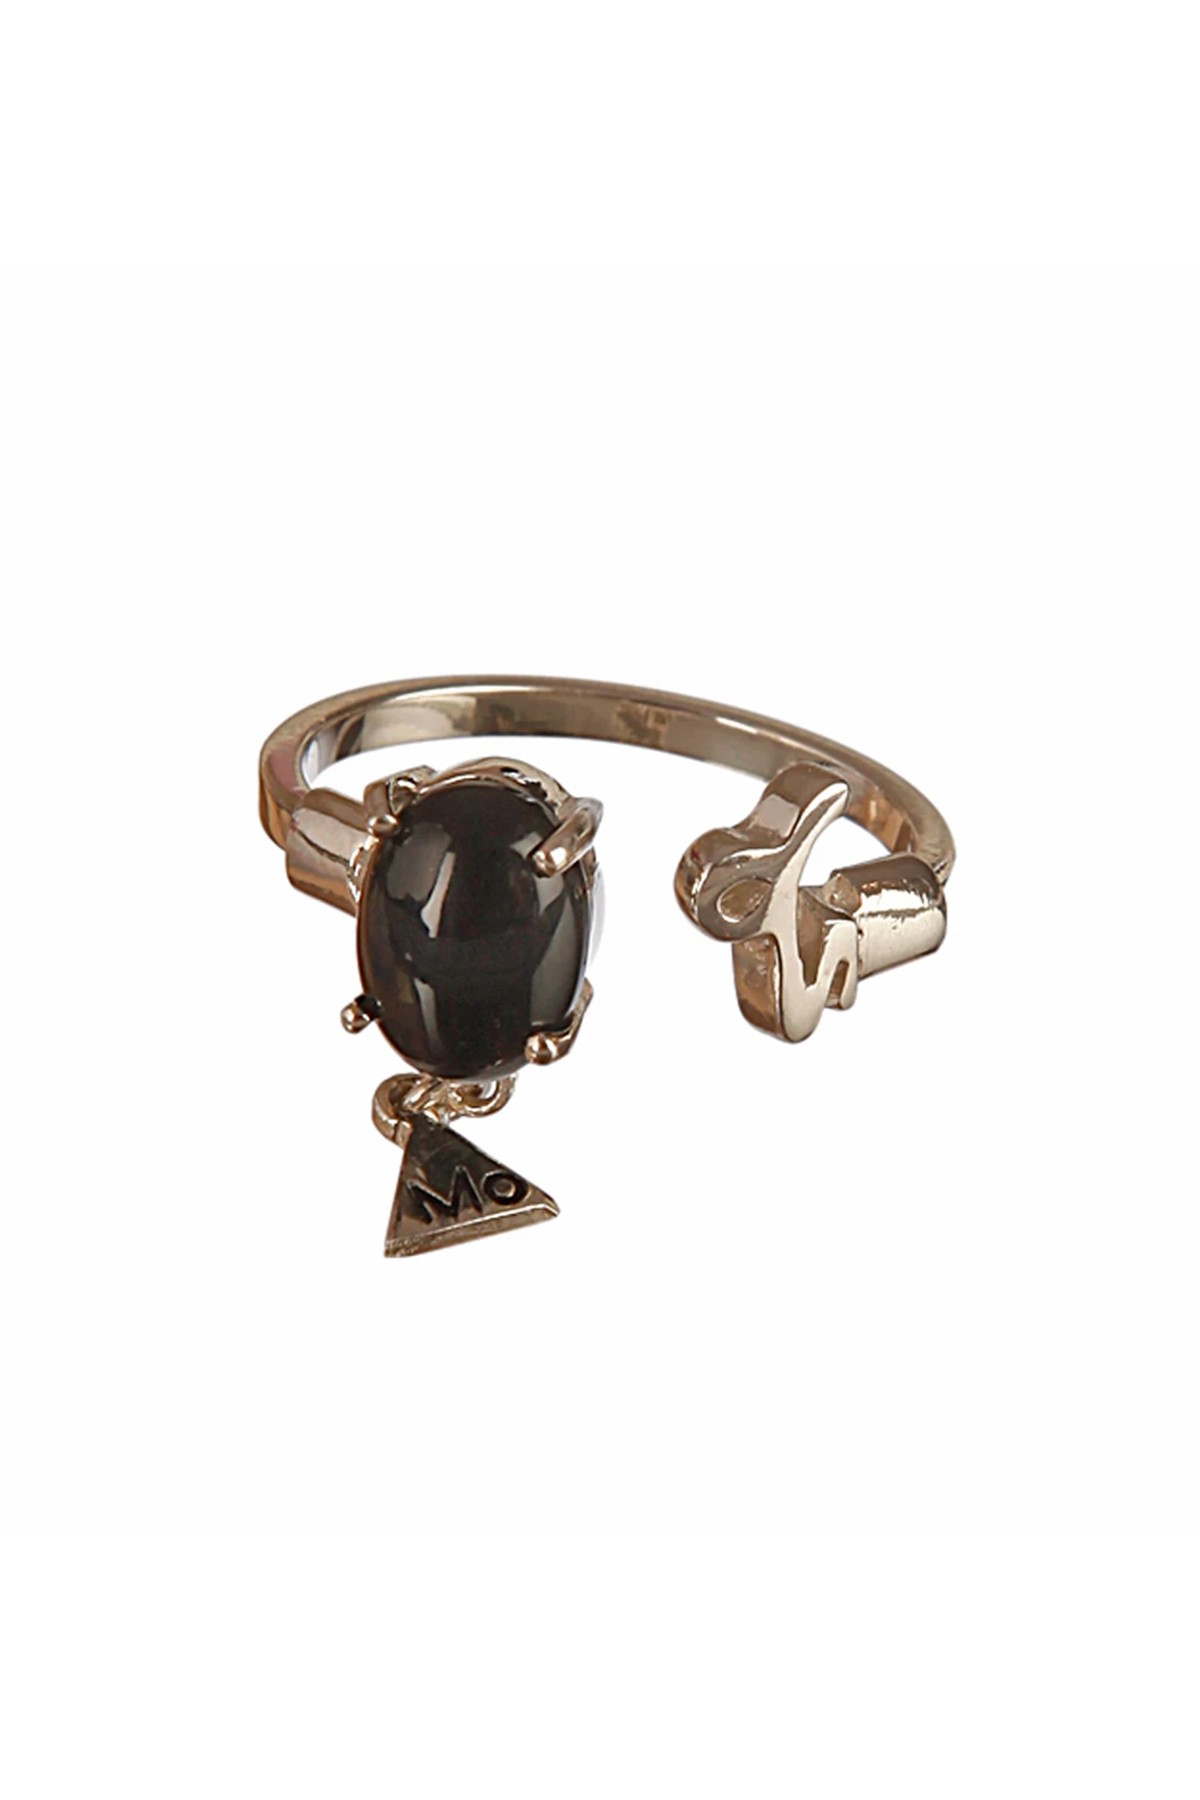 Classy Capricorn Ring - 14K Gold Micron Plated